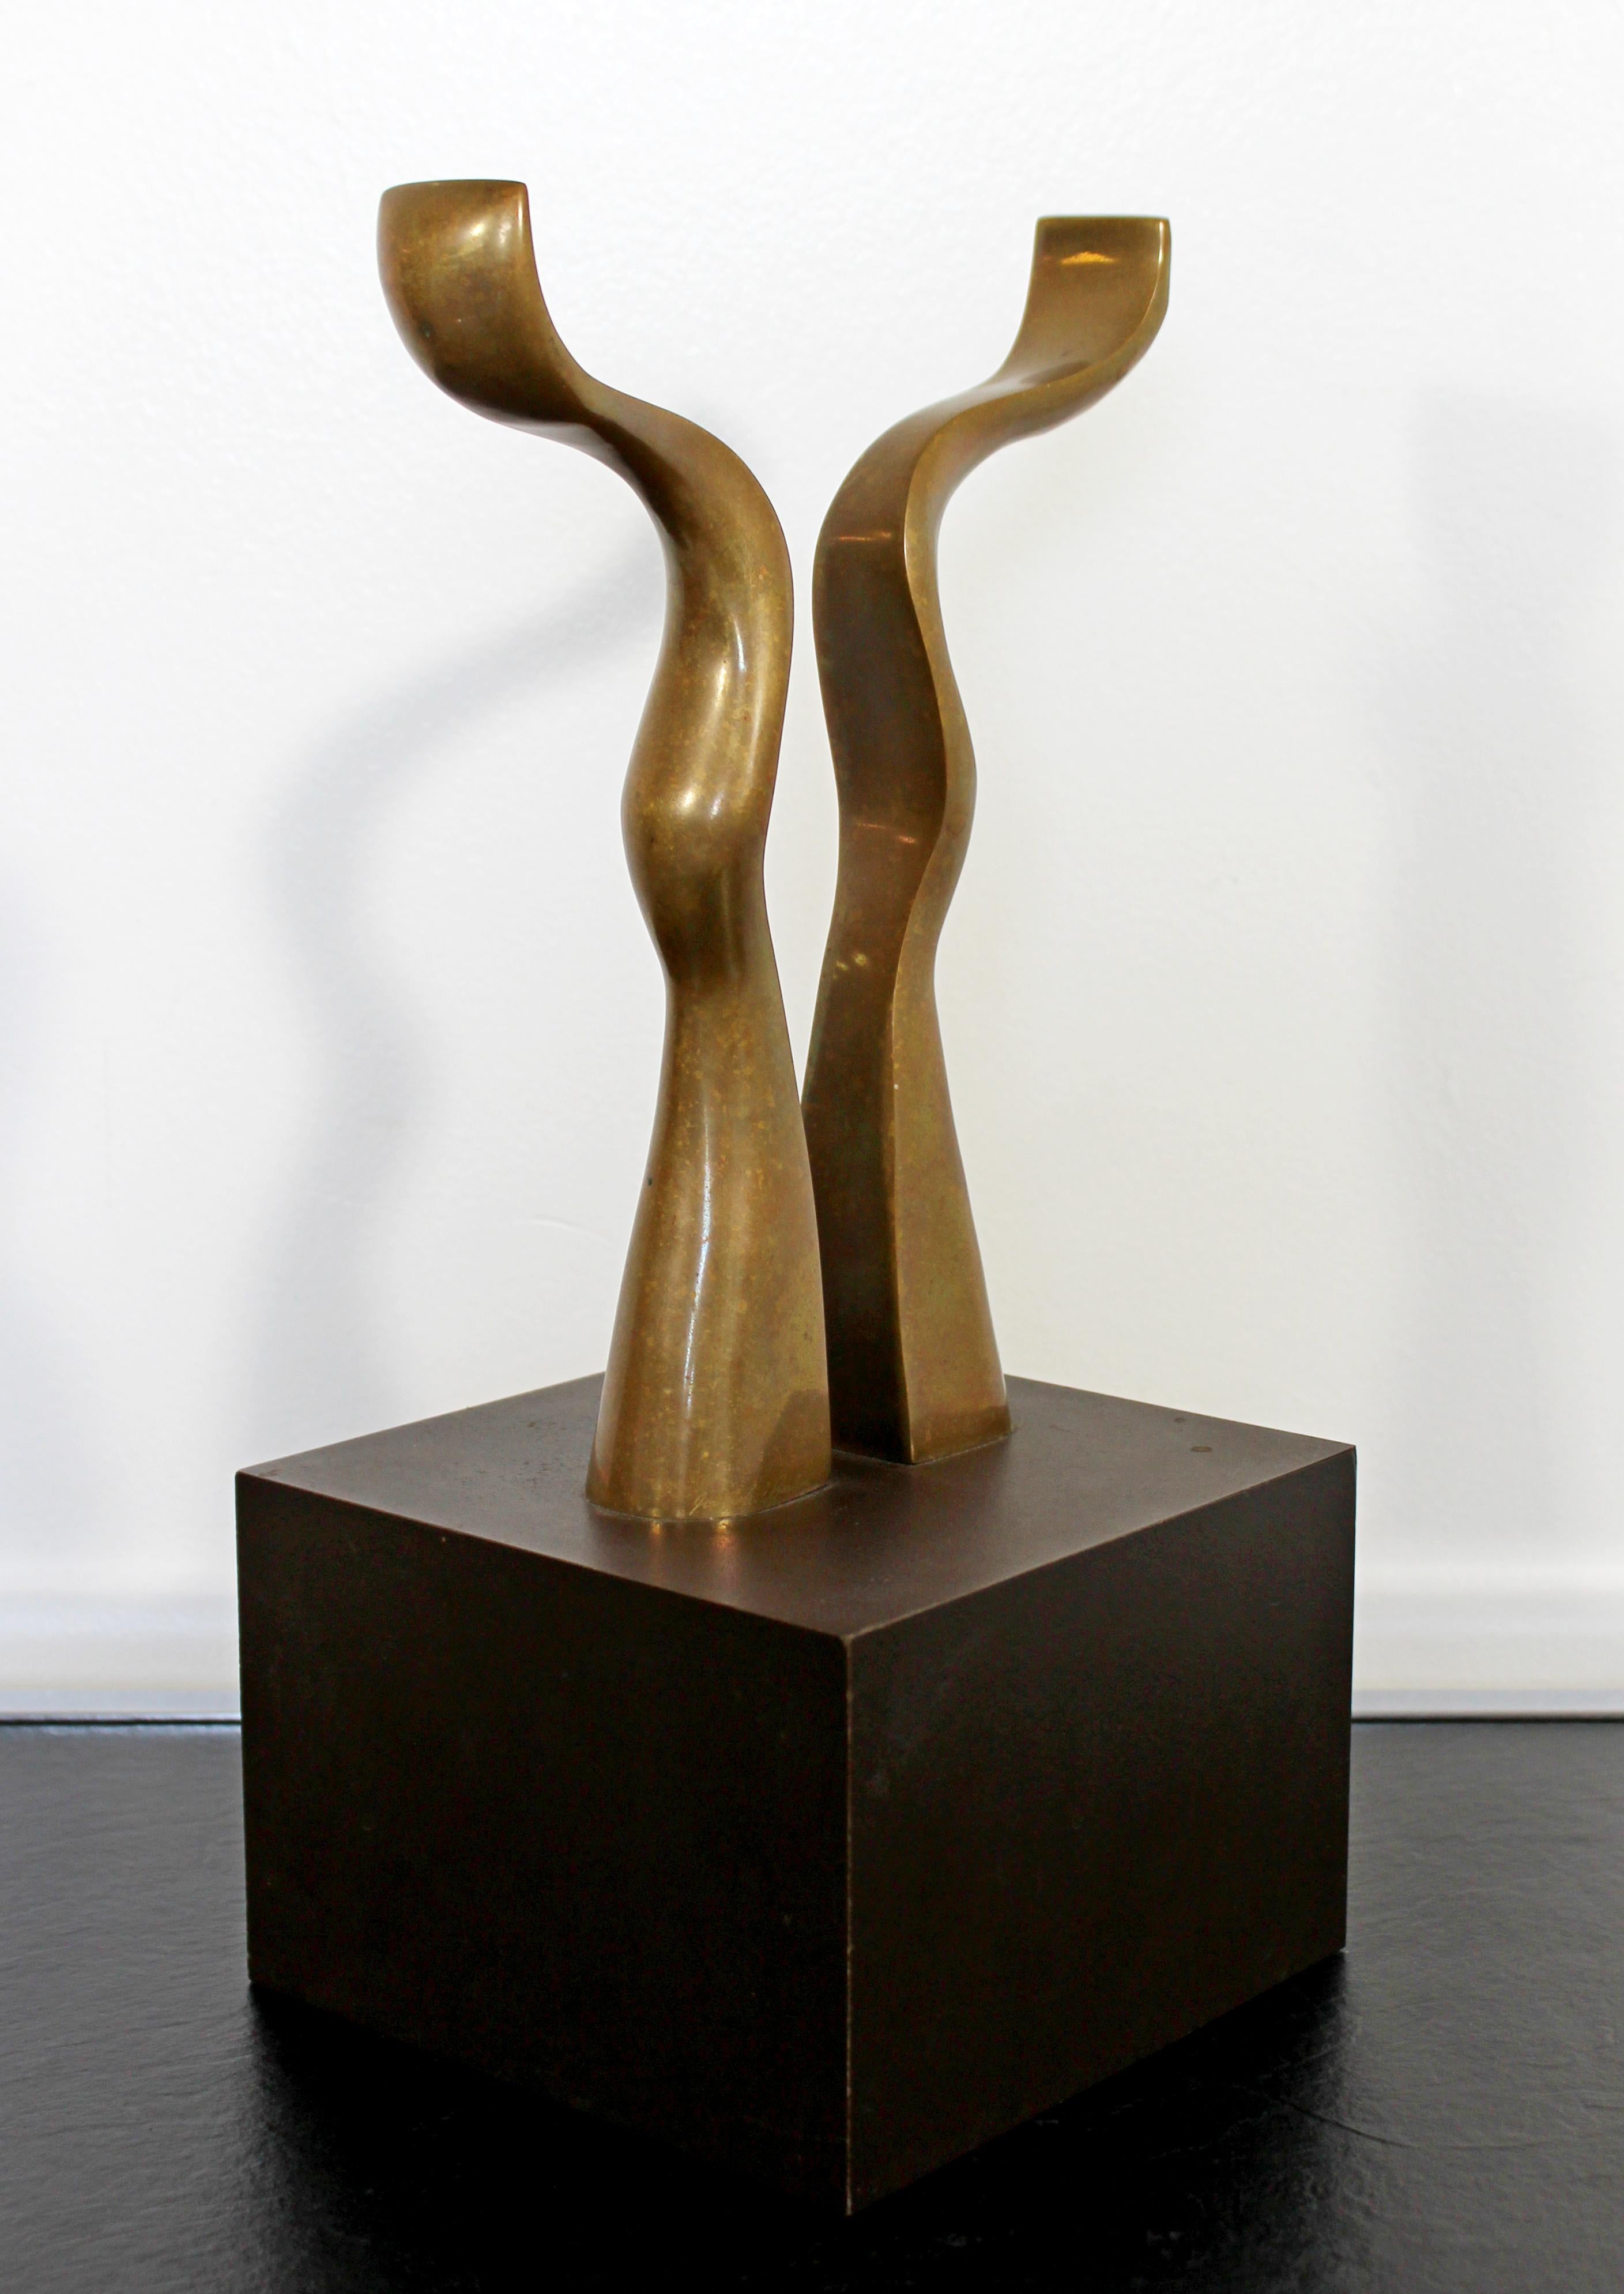 For your consideration is a fantastic, abstract, bronze table sculpture, signed by Joseph Burlini, numbered 4/5, dated 1980. In excellent condition. The dimensions are 6